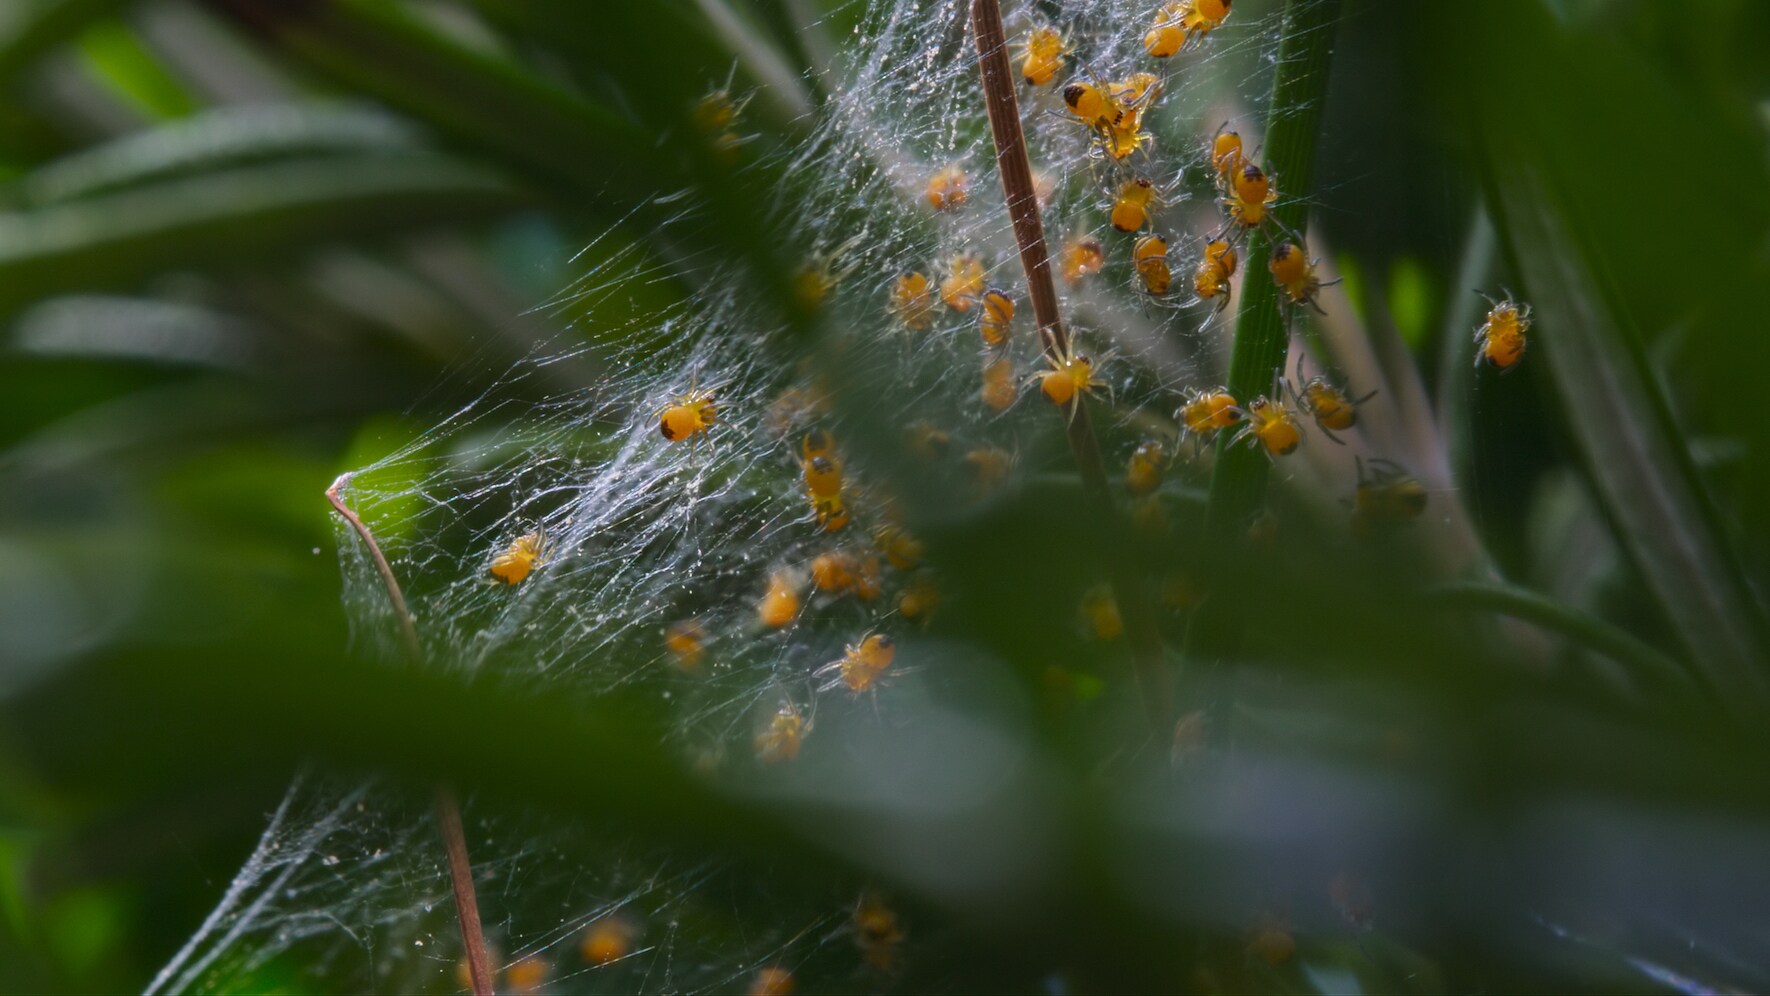 Spiderlings gathering on a communal web are featured in "The Busy Farm" episode of "A Real Bug's Life." (National Geographic)